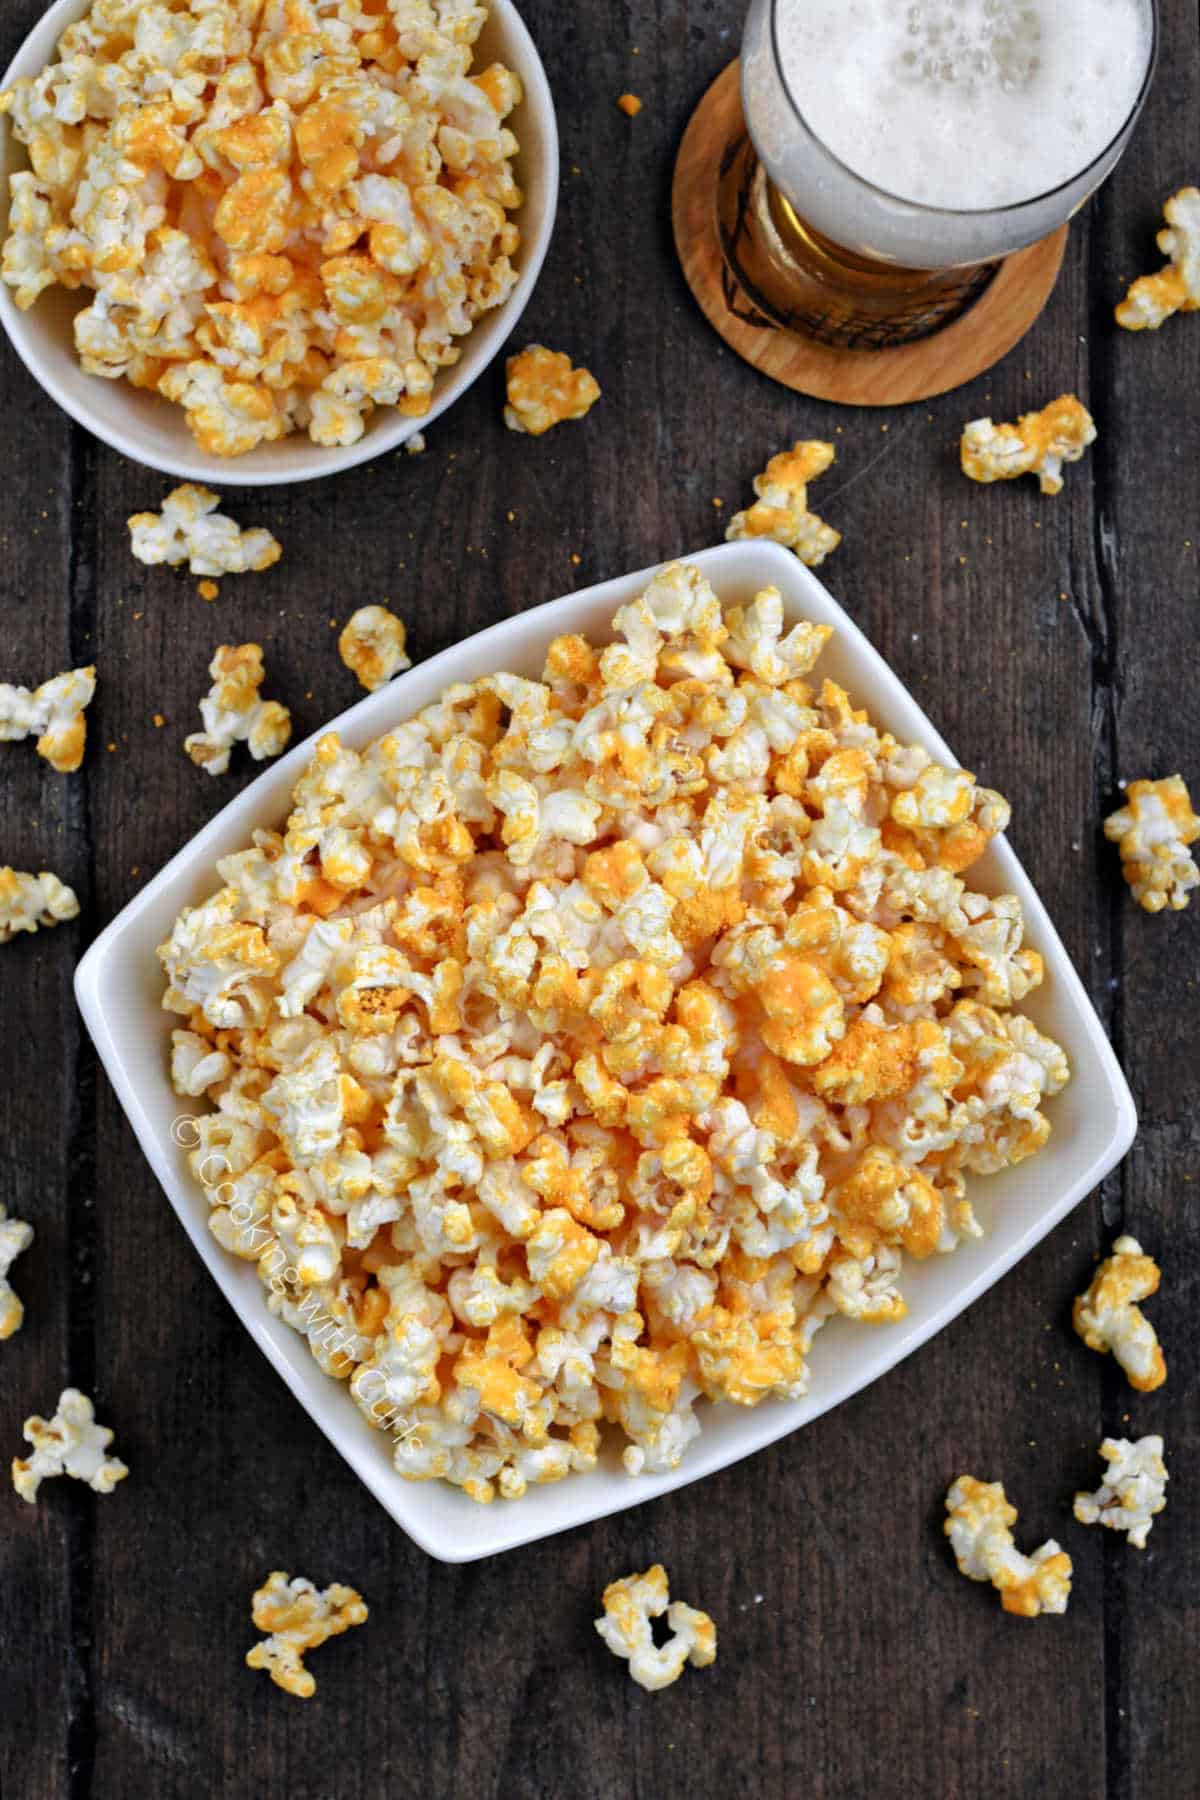 Two bowls of cheddar cheese popcorn surrounded by scattered pieces of popcorn.